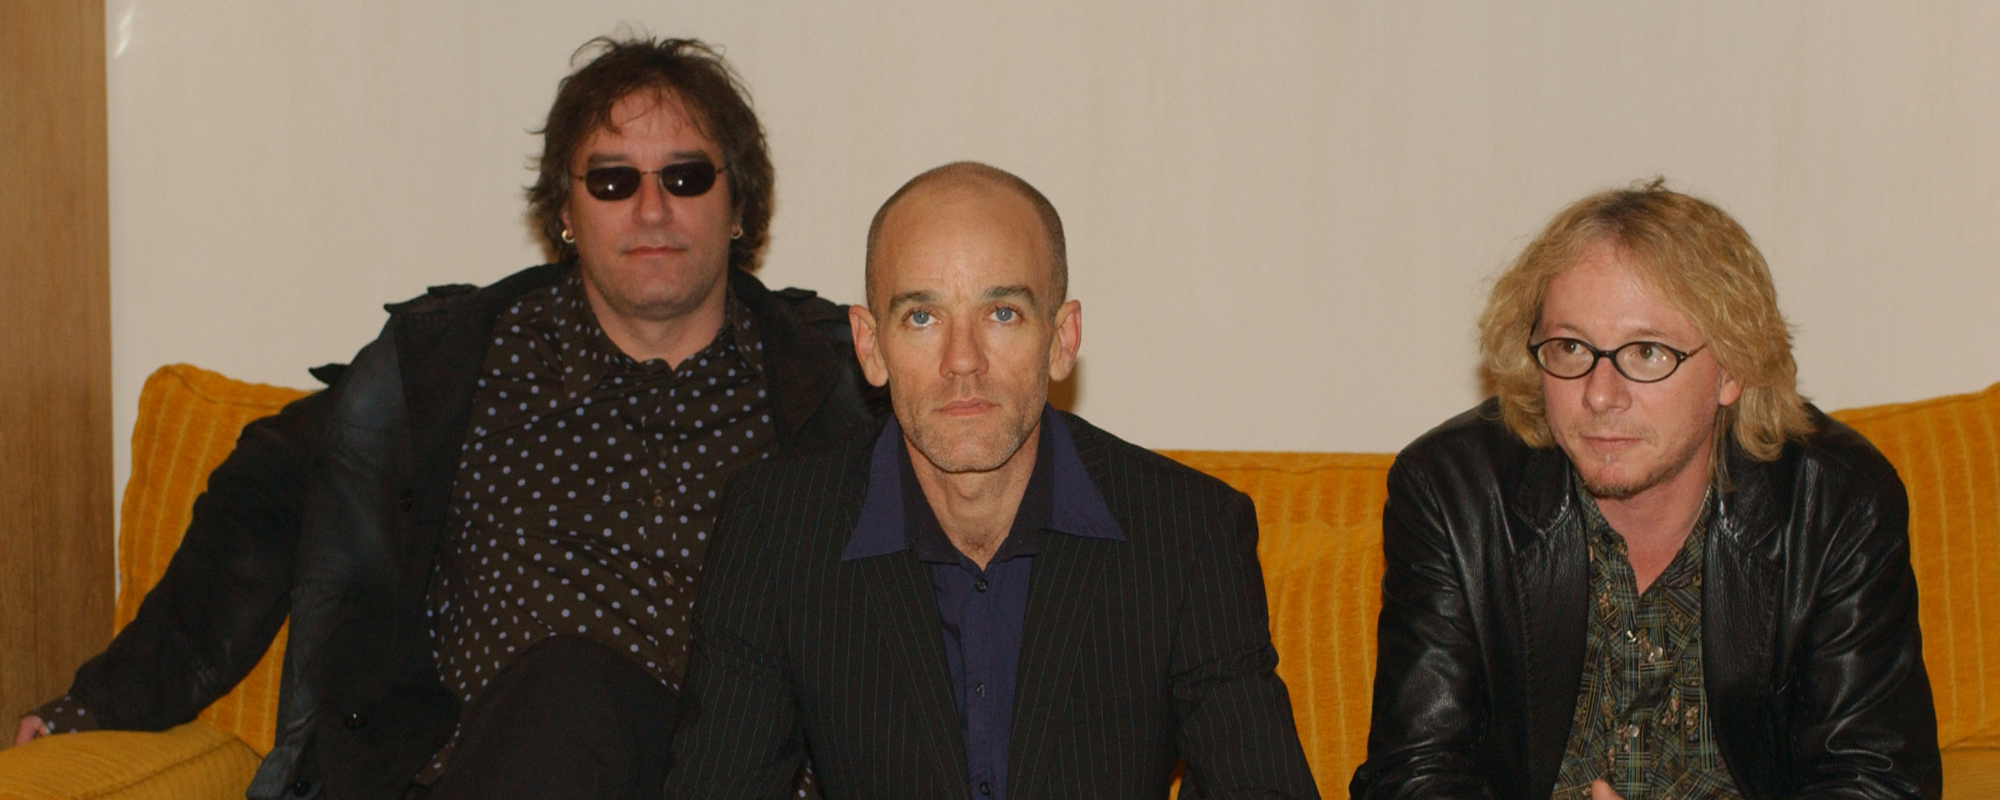 Listen to Michael Stipe for Healthy Brain Function: The Meaning Behind R.E.M.’s “Daysleeper”